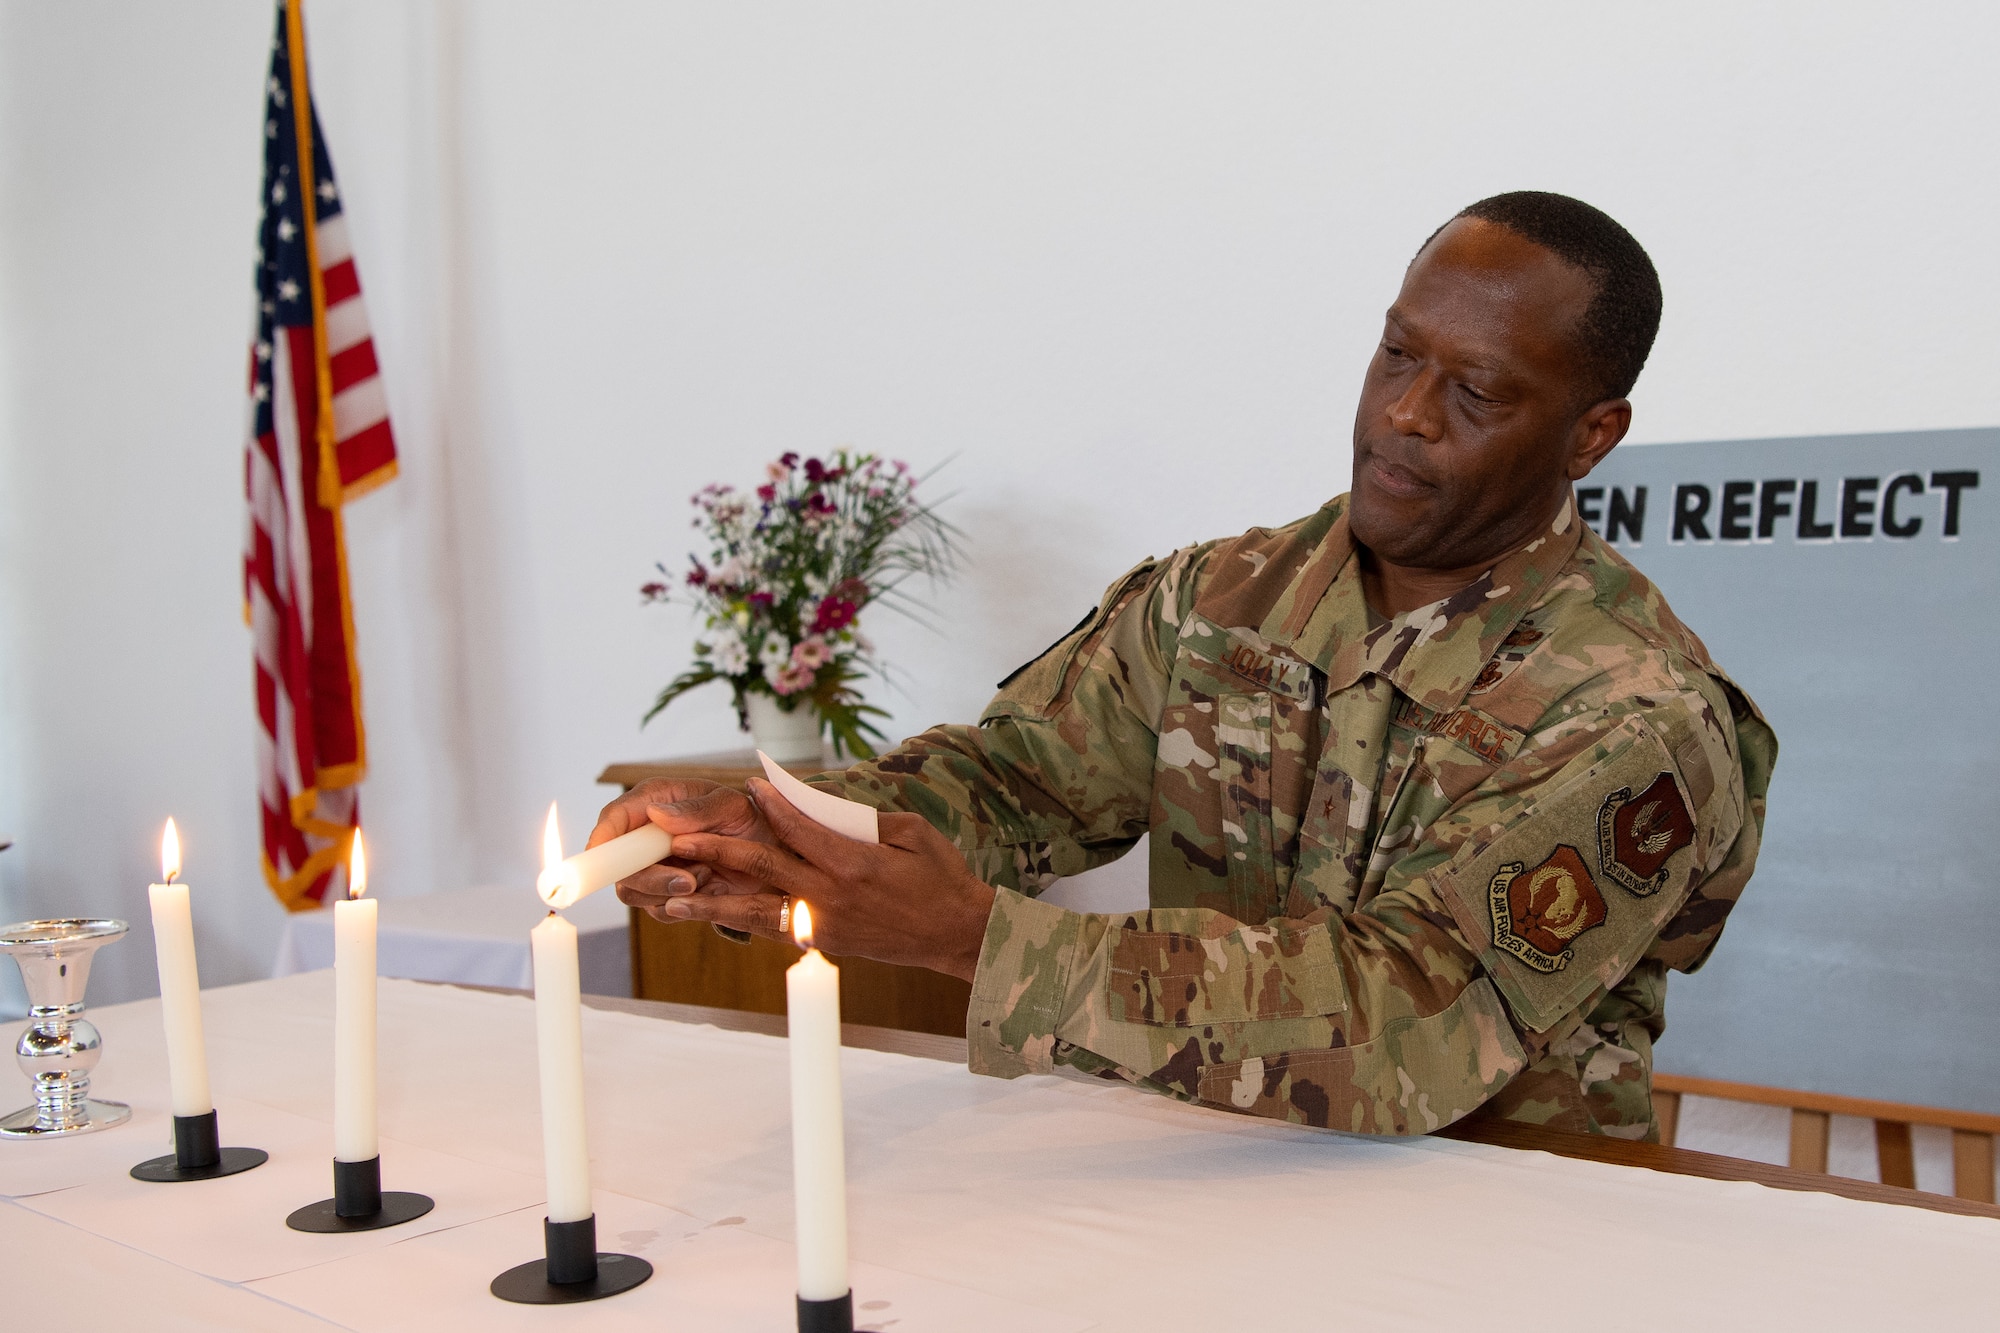 U.S. Air Force Brig. Gen. Ronald E. Jolly Sr., U.S. Air Forces in Europe and Air Forces Africa logistics, engineering and force protection director, lights a candle after giving a speech during the Juneteenth: Vigil for Healing event at Ramstein Air Base, Germany, June 19, 2020.